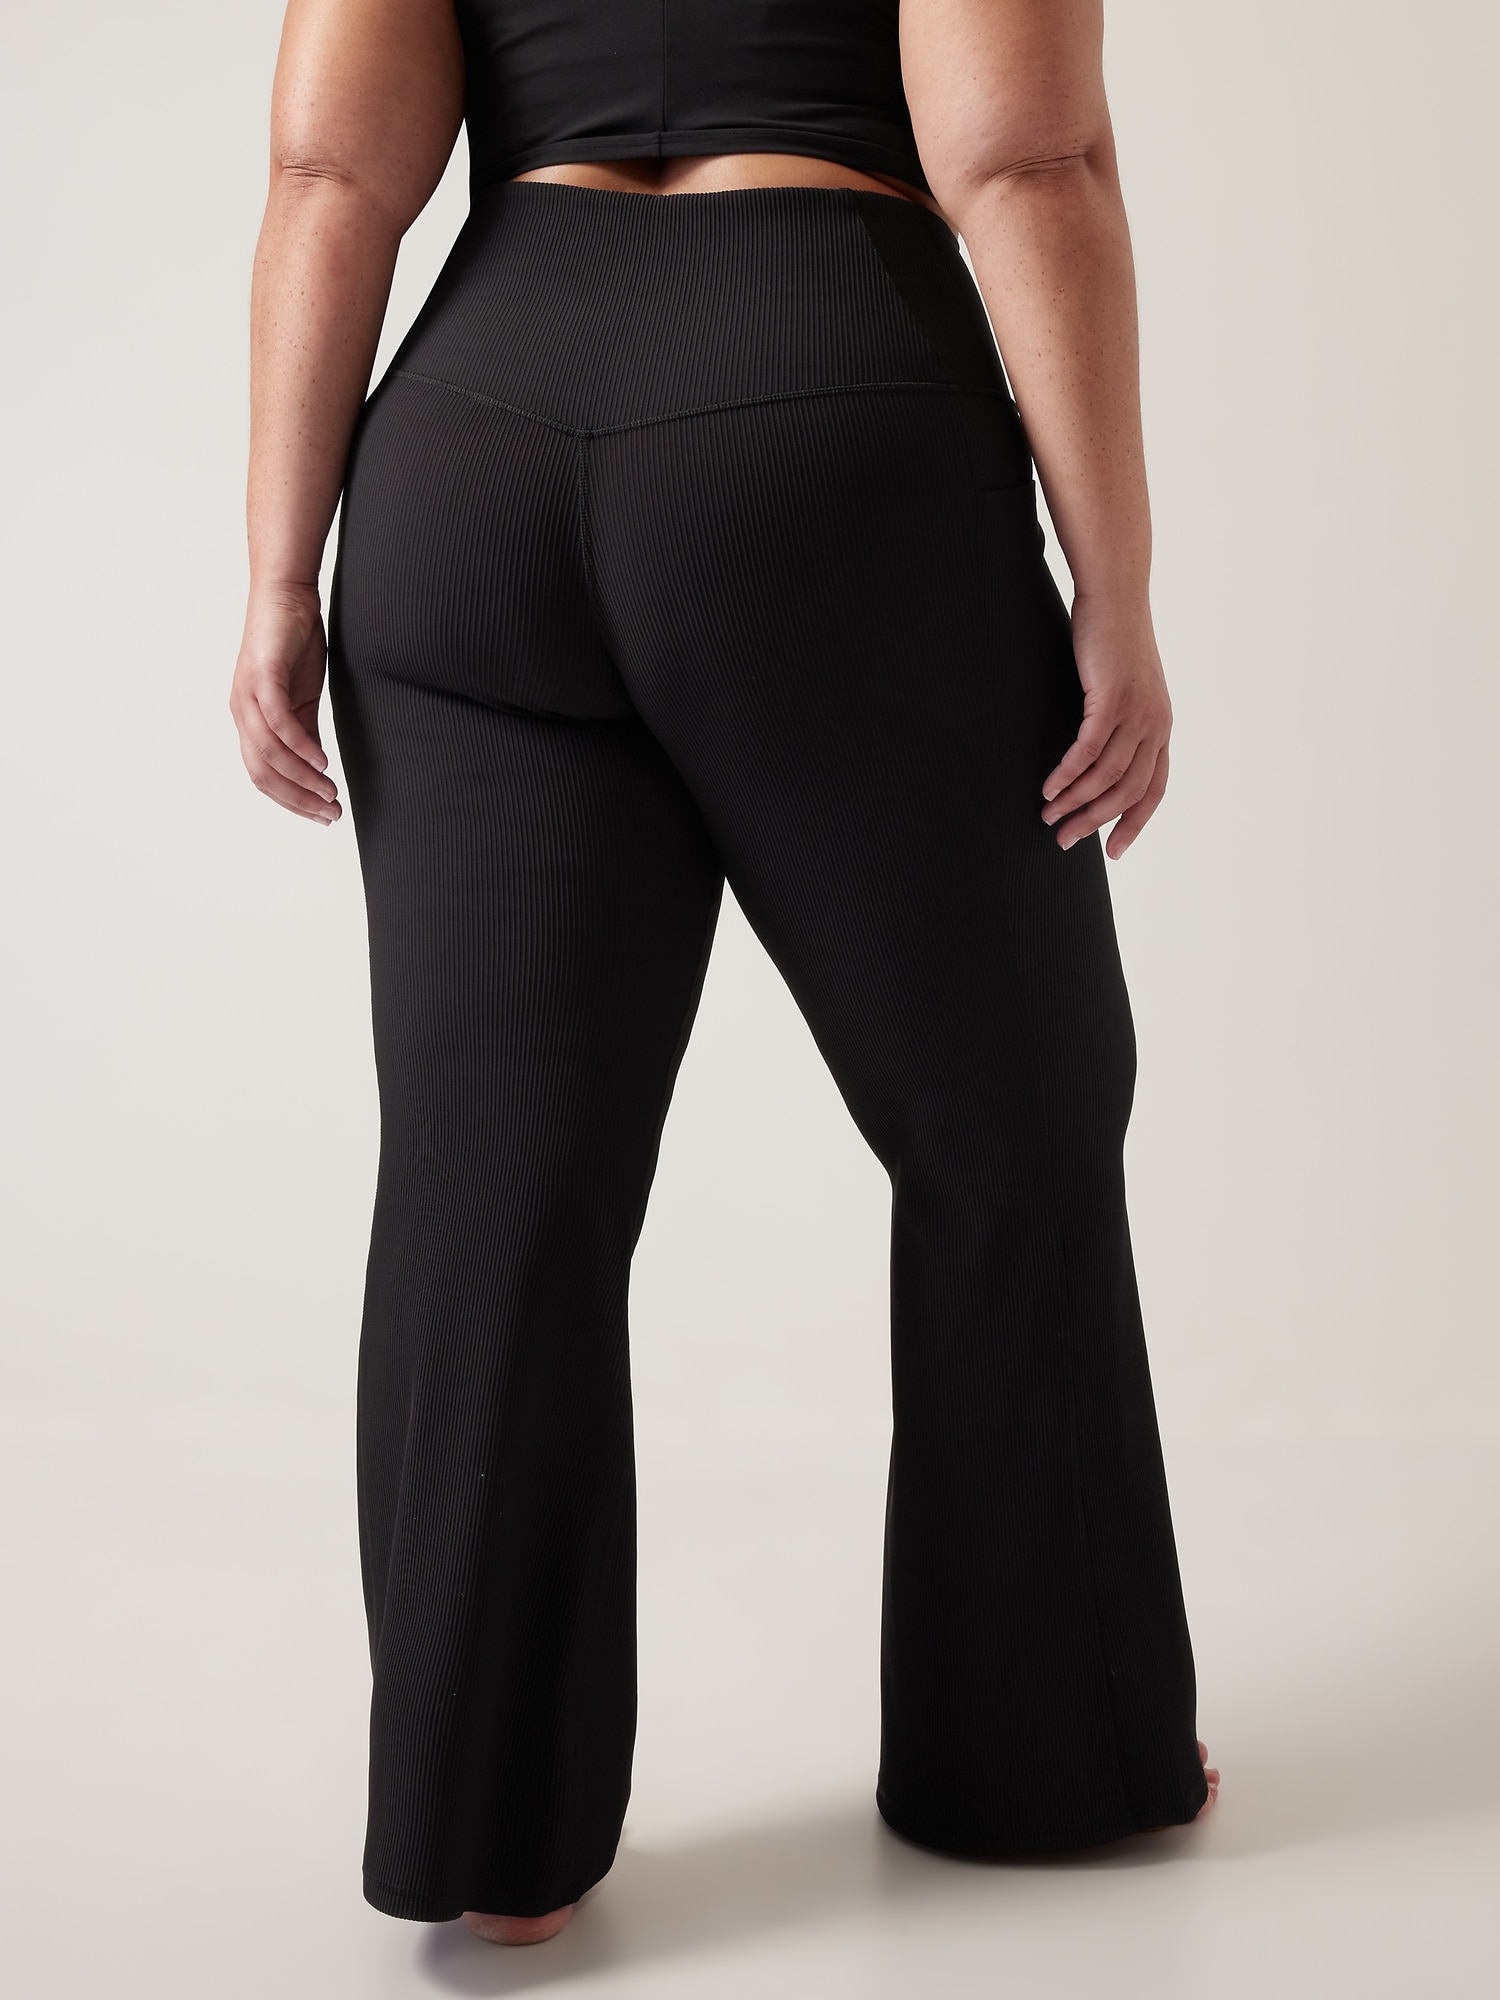 Gina Tricot Gina Tricot - Y wide yoga pants - young-bottoms- Black